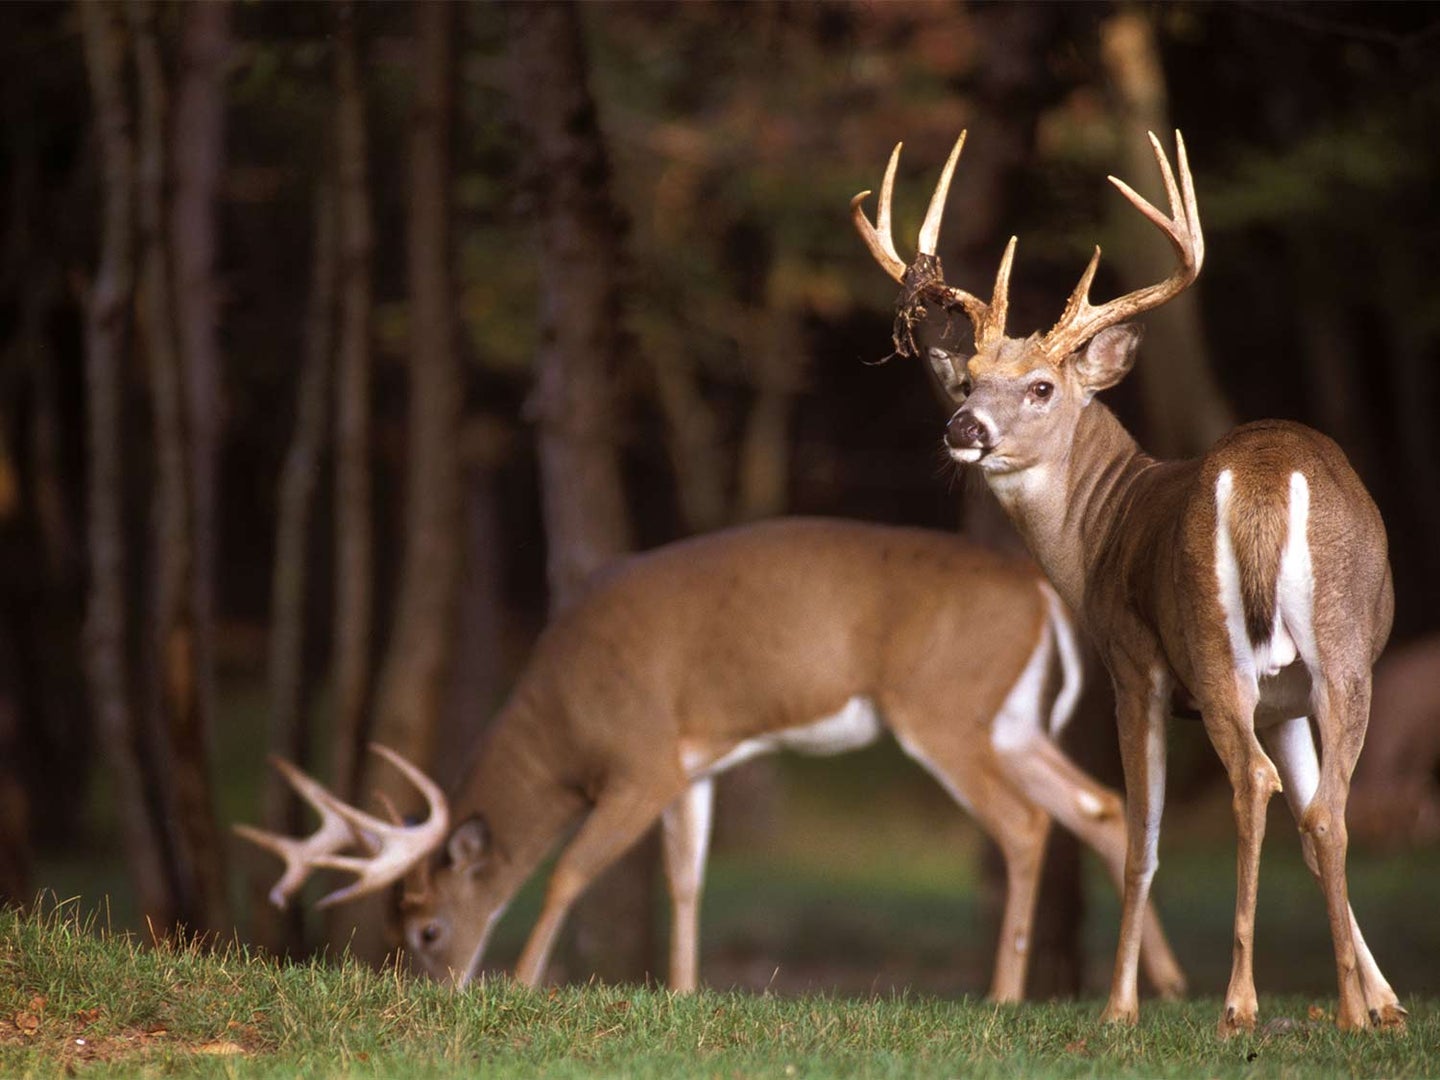 Two whitetail bucks feeding in a grassy area by a forest tree line.